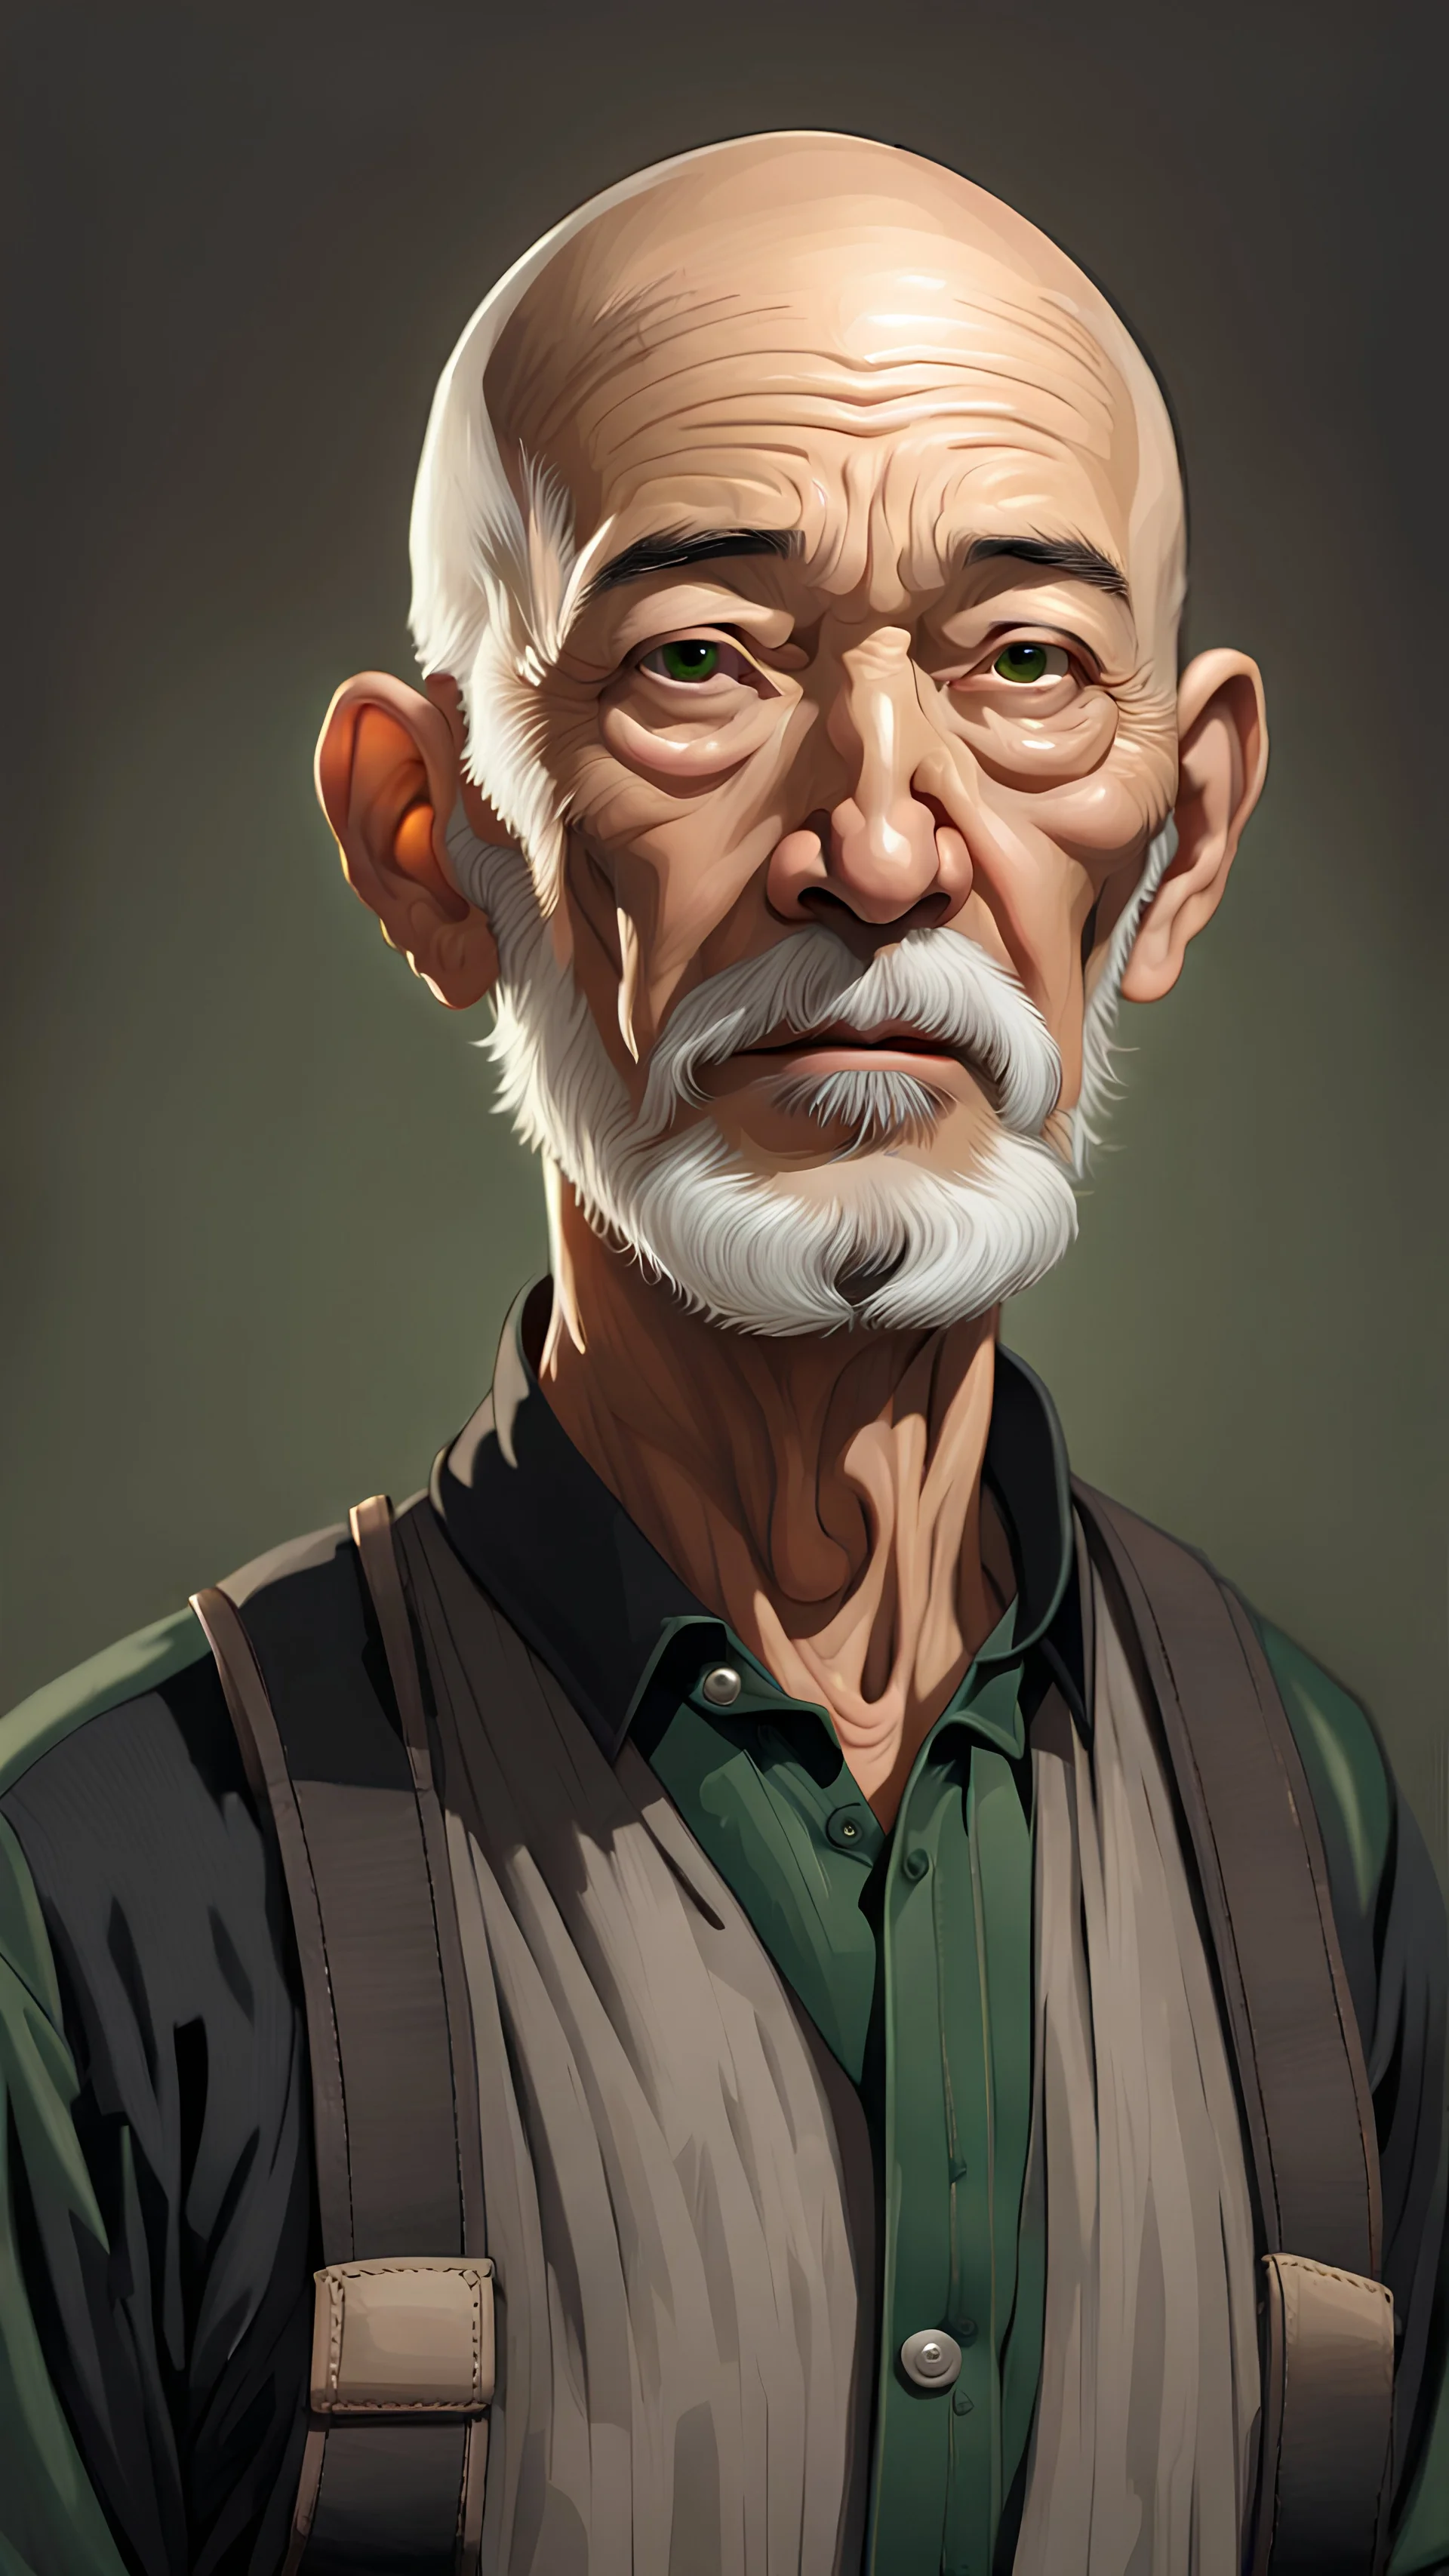 A sixty-year-old man, round and innocent face, short gray beard, small brown eyes with dark circles, completely bald, thoughtful expression, oriental features, dressed in a black shirt, beige pants with green suspenders and white sports shoes. Well-lit, high-definition hyper-realistic style.